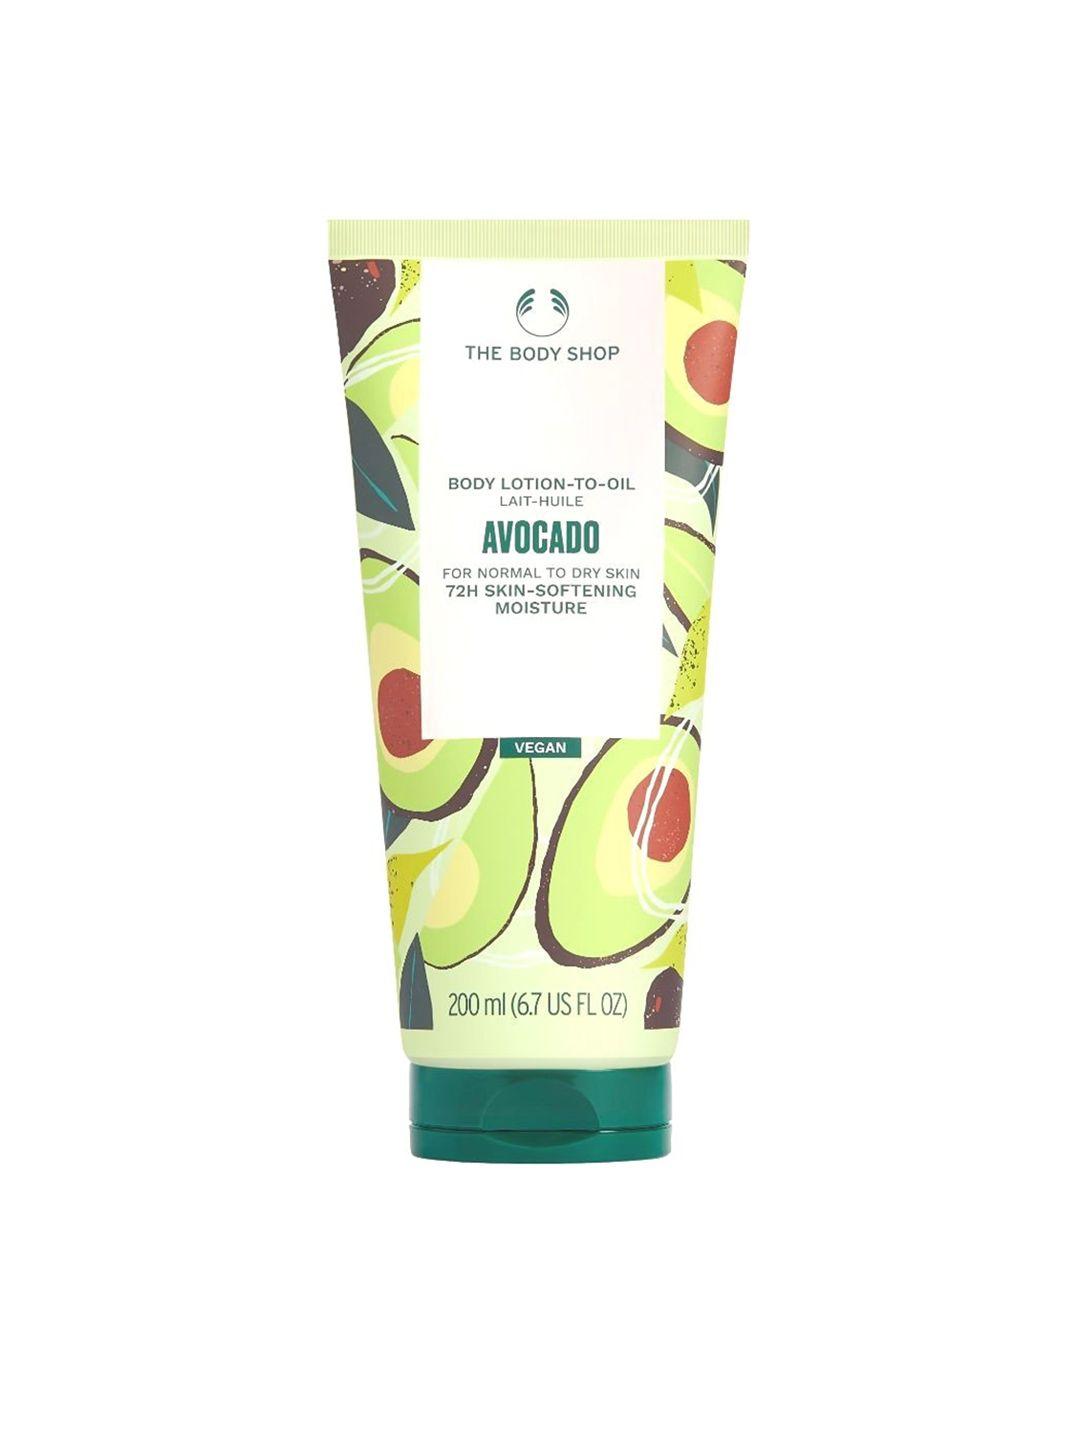 the body shop avocado 72h skin-softening moisture body lotion-to-oil with shea - 200 ml